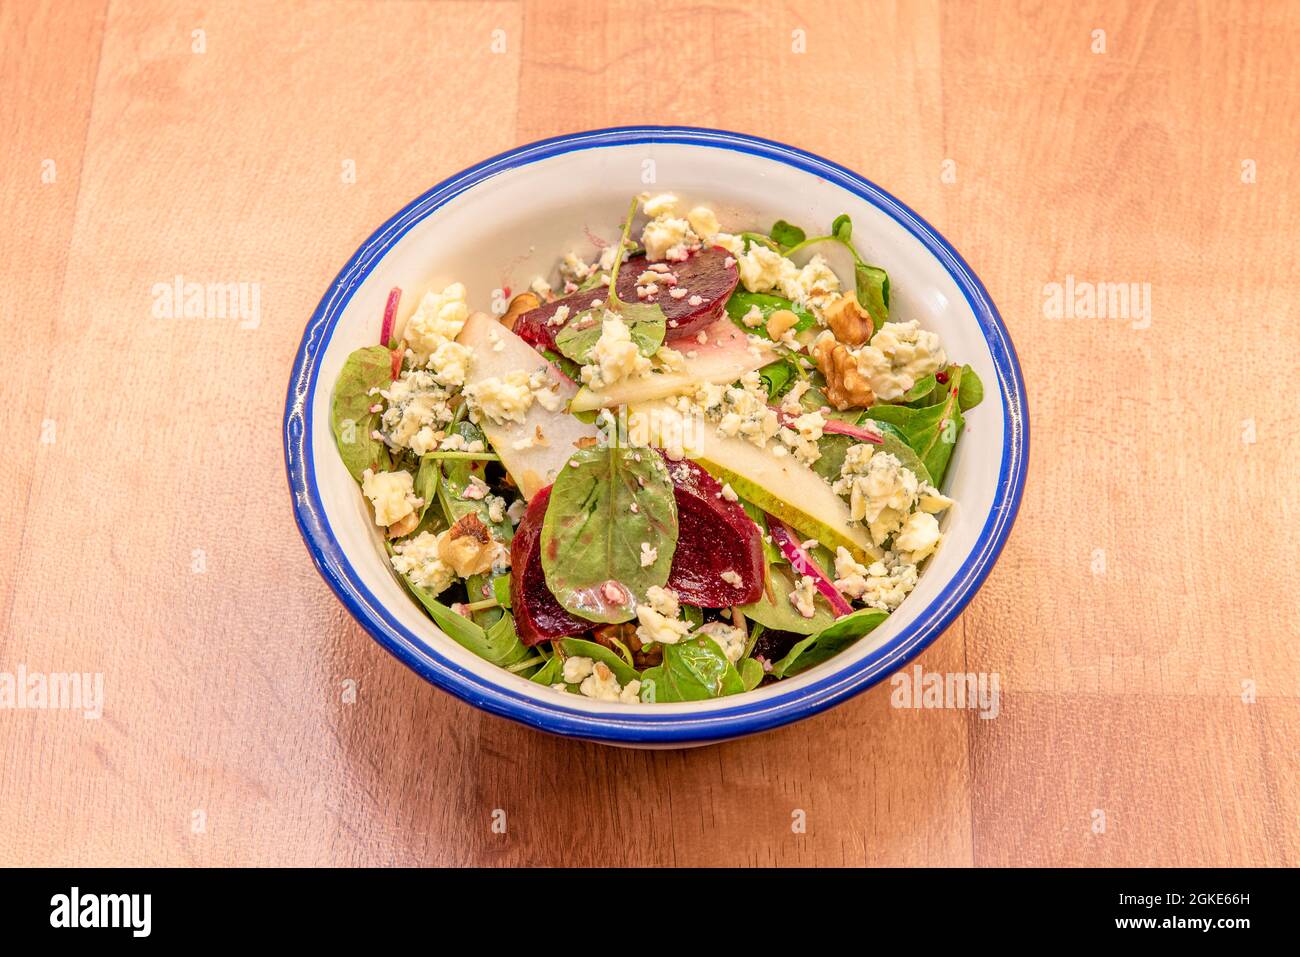 Spinach salad with beetroot slices, pear thin slices, crumbled blue cheese, pieces of nuts inside an enameled metal bowl Stock Photo